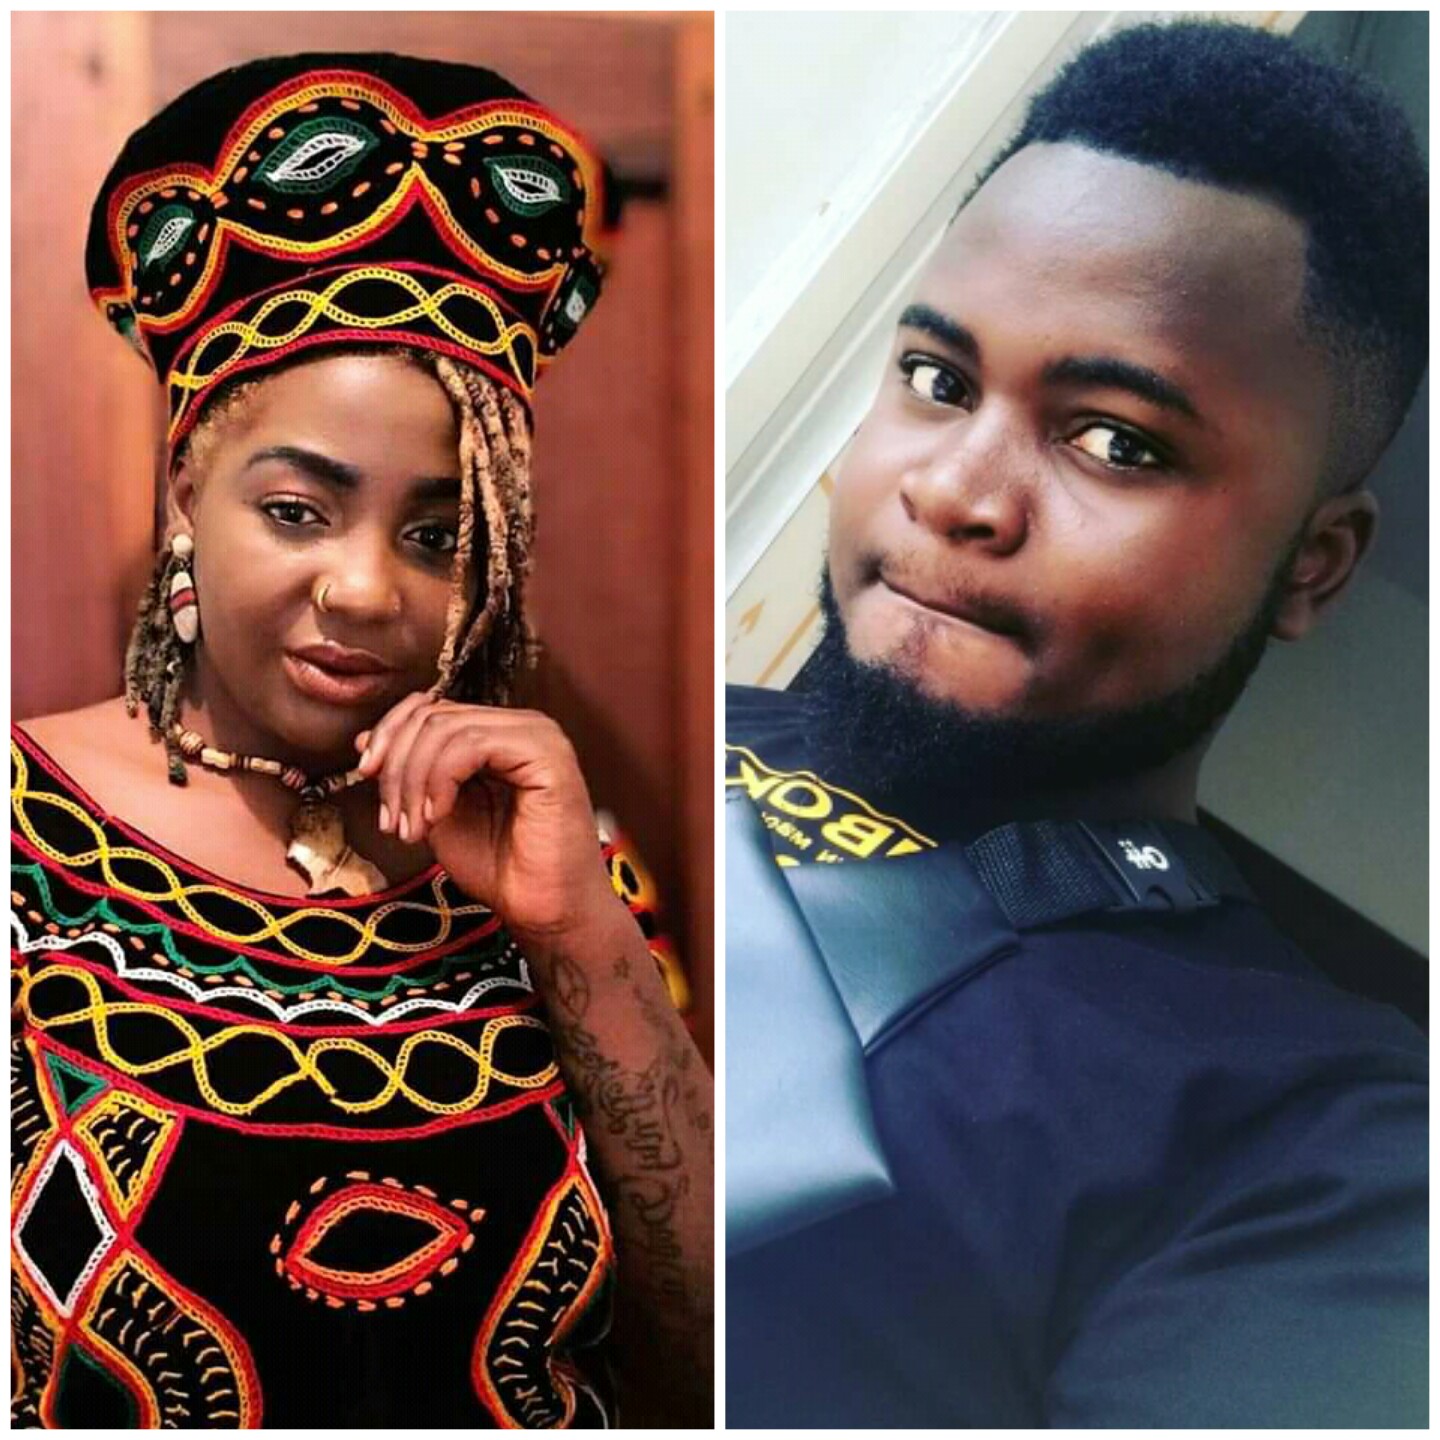 TILLA’S OUTBURST ON JOVI GETS CLAP-BACK FROM JOVI’S FAN AND BLOGGER PIUS BERY